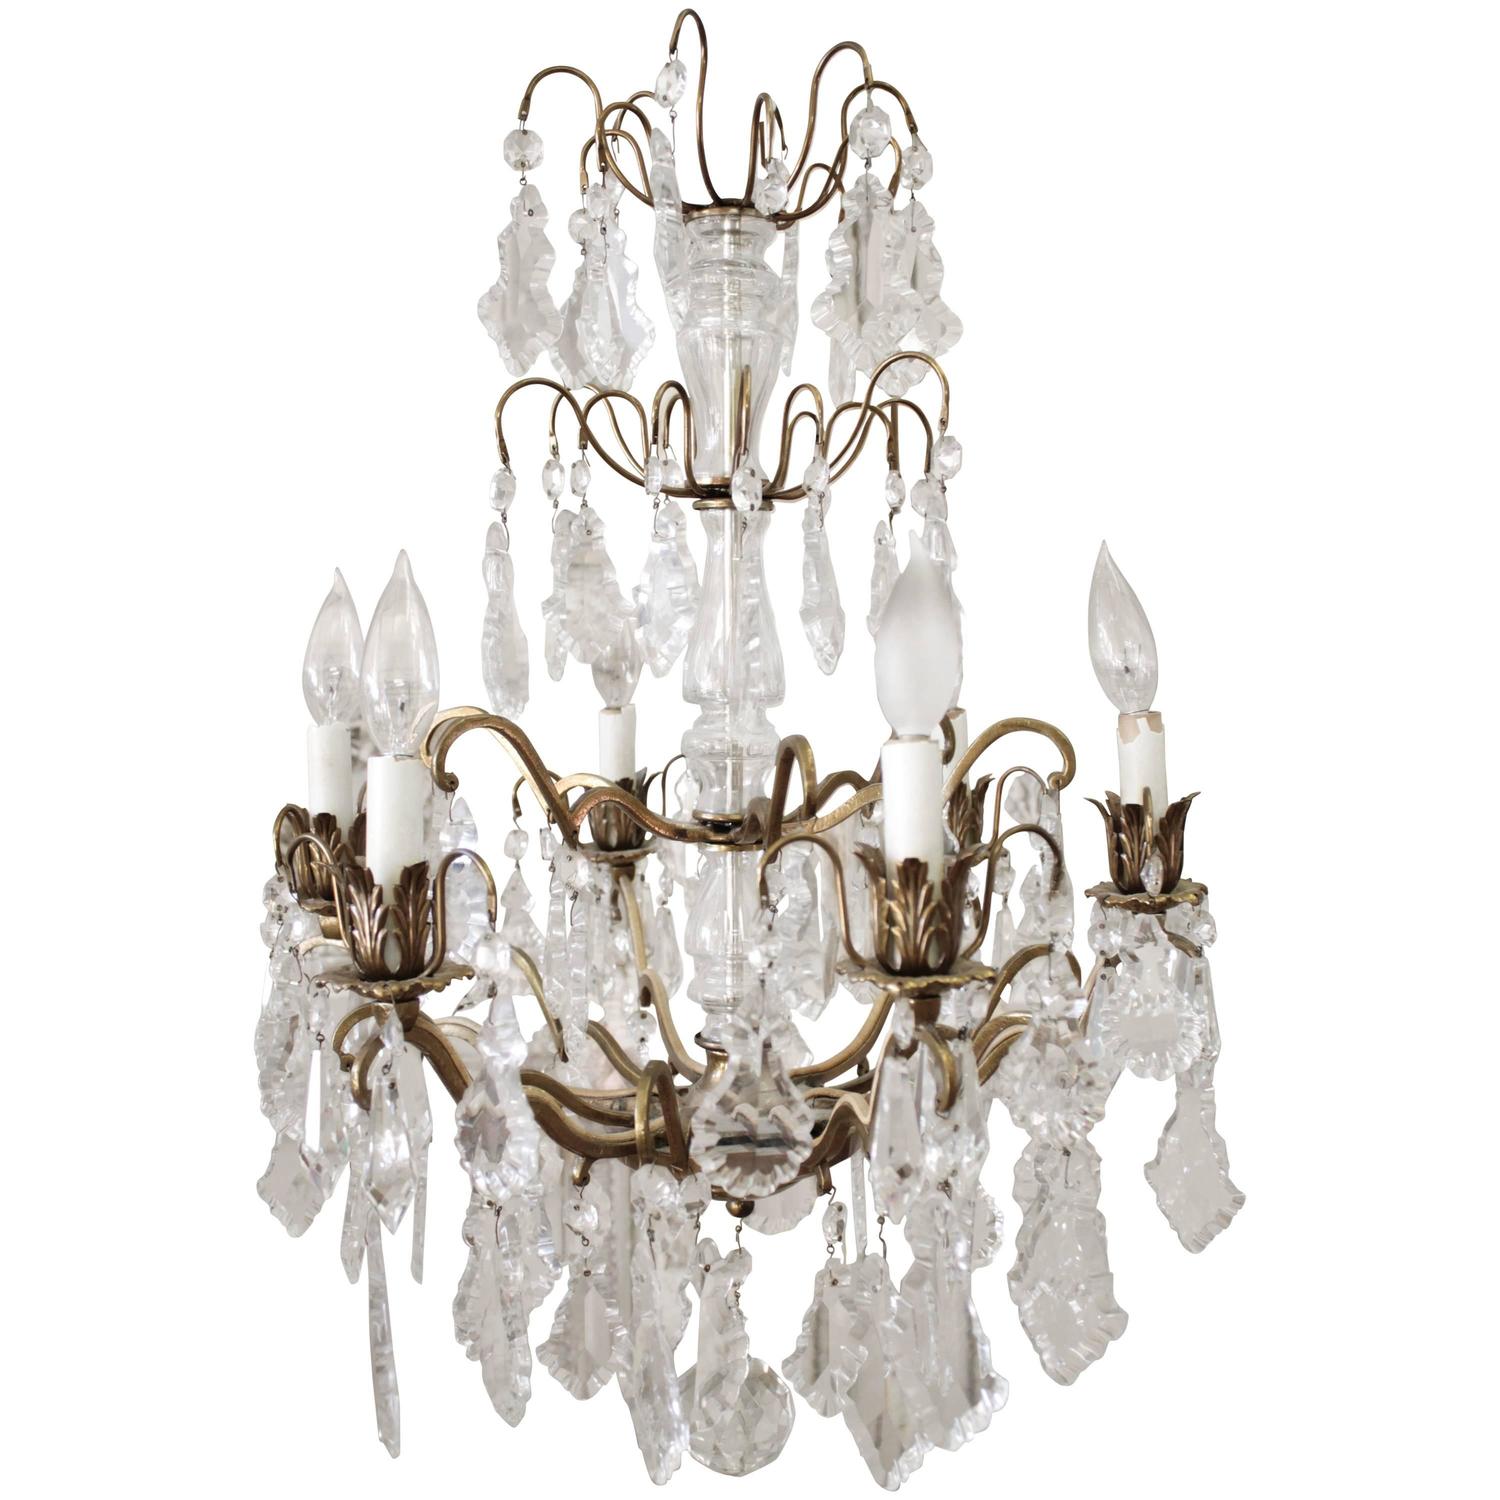 Antique French Crystal and Bronze Chandelier For Sale at 1stdibs